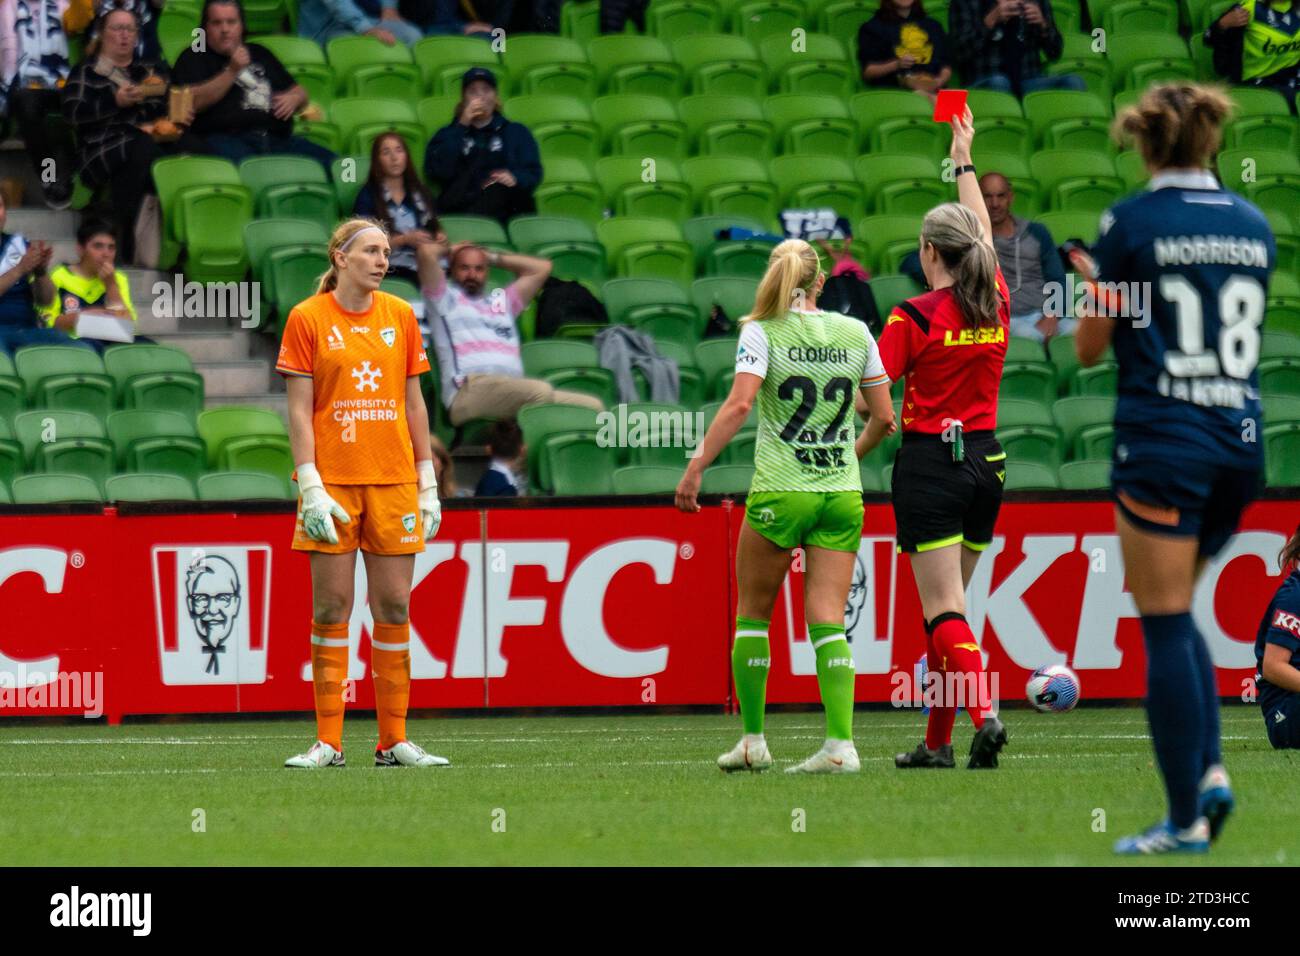 Melbourne, Australia. 16 December, 2023. Canberra United FC Goalkeeper Chloe  Lincoln (#1) receives a straight red card after mistiming a save and  collecting the player. Credit: James Forrester/Alamy Live News Stock Photo  - Alamy